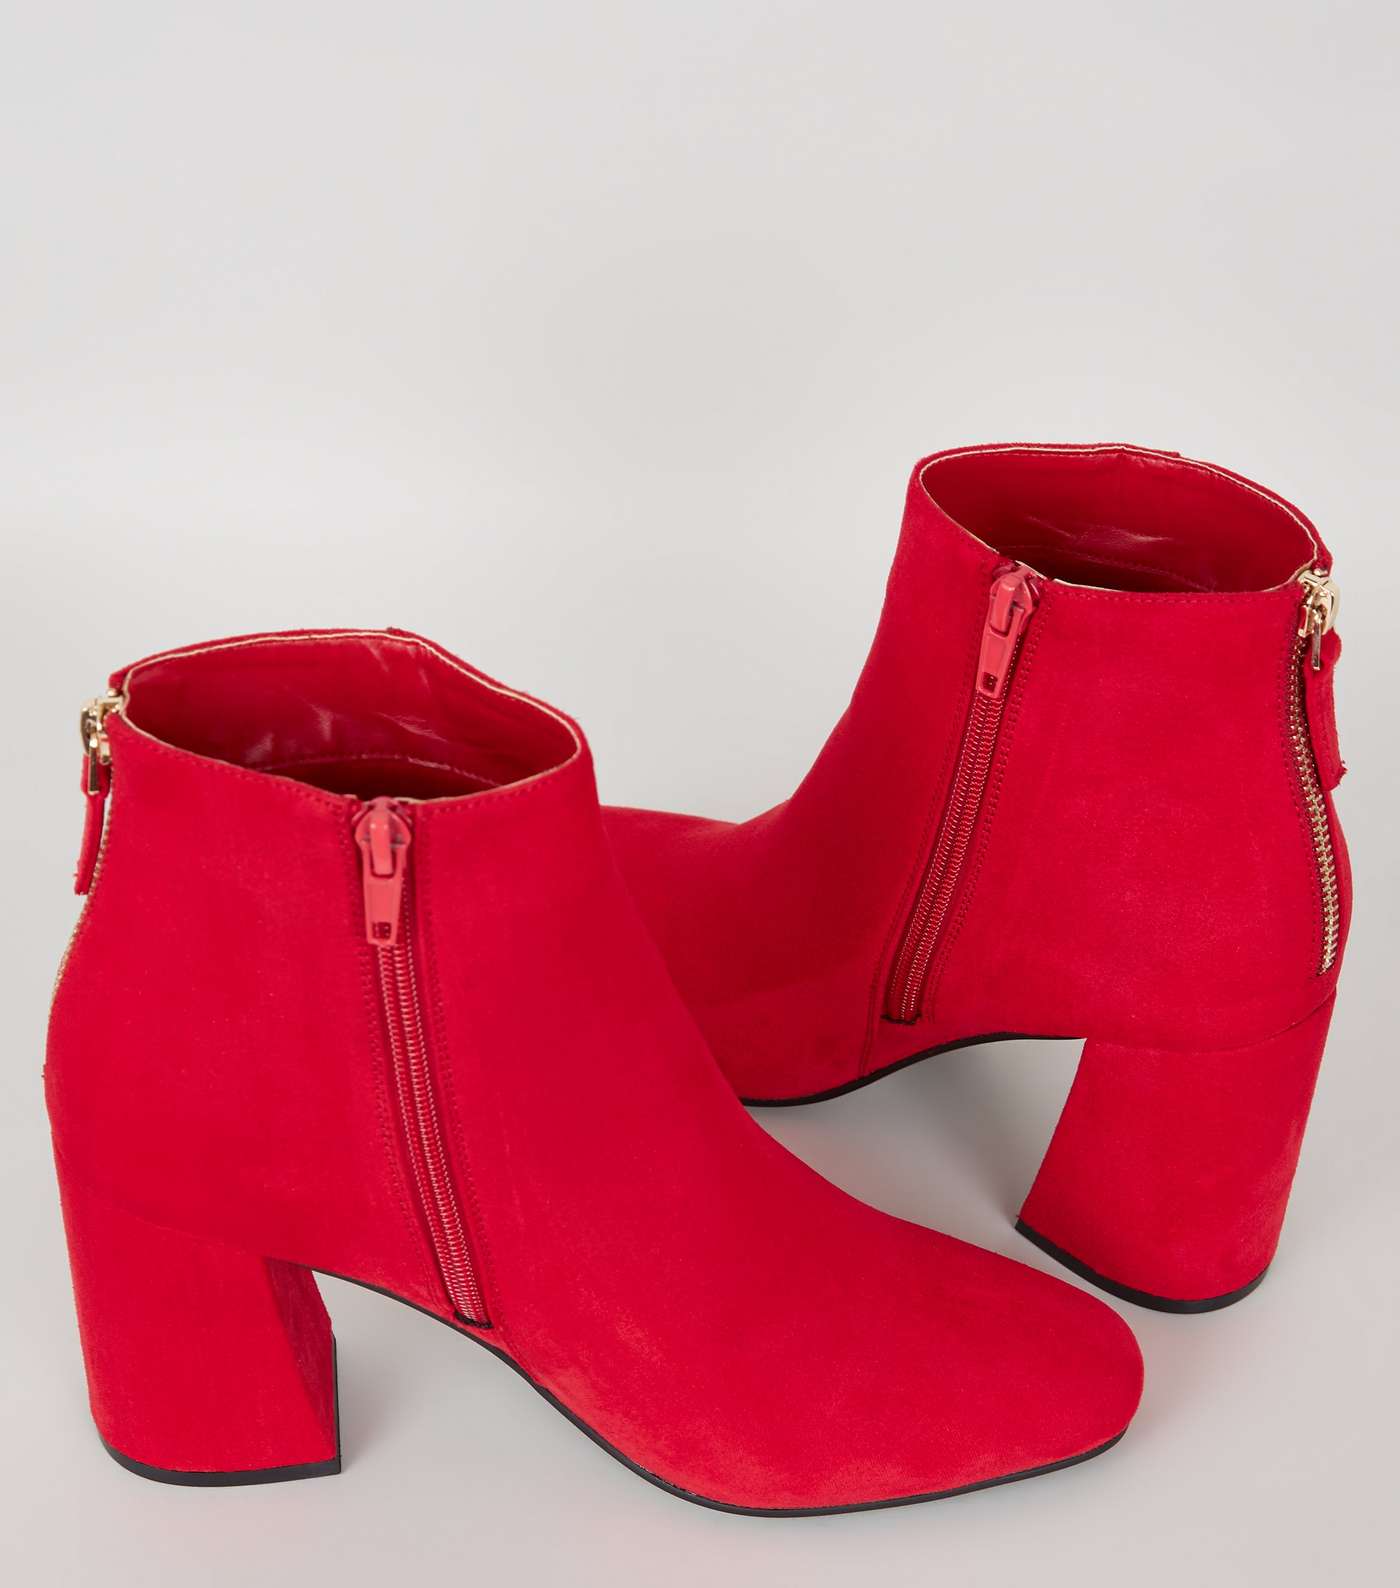 Red Suedette Square Toe Ankle Boots Image 4